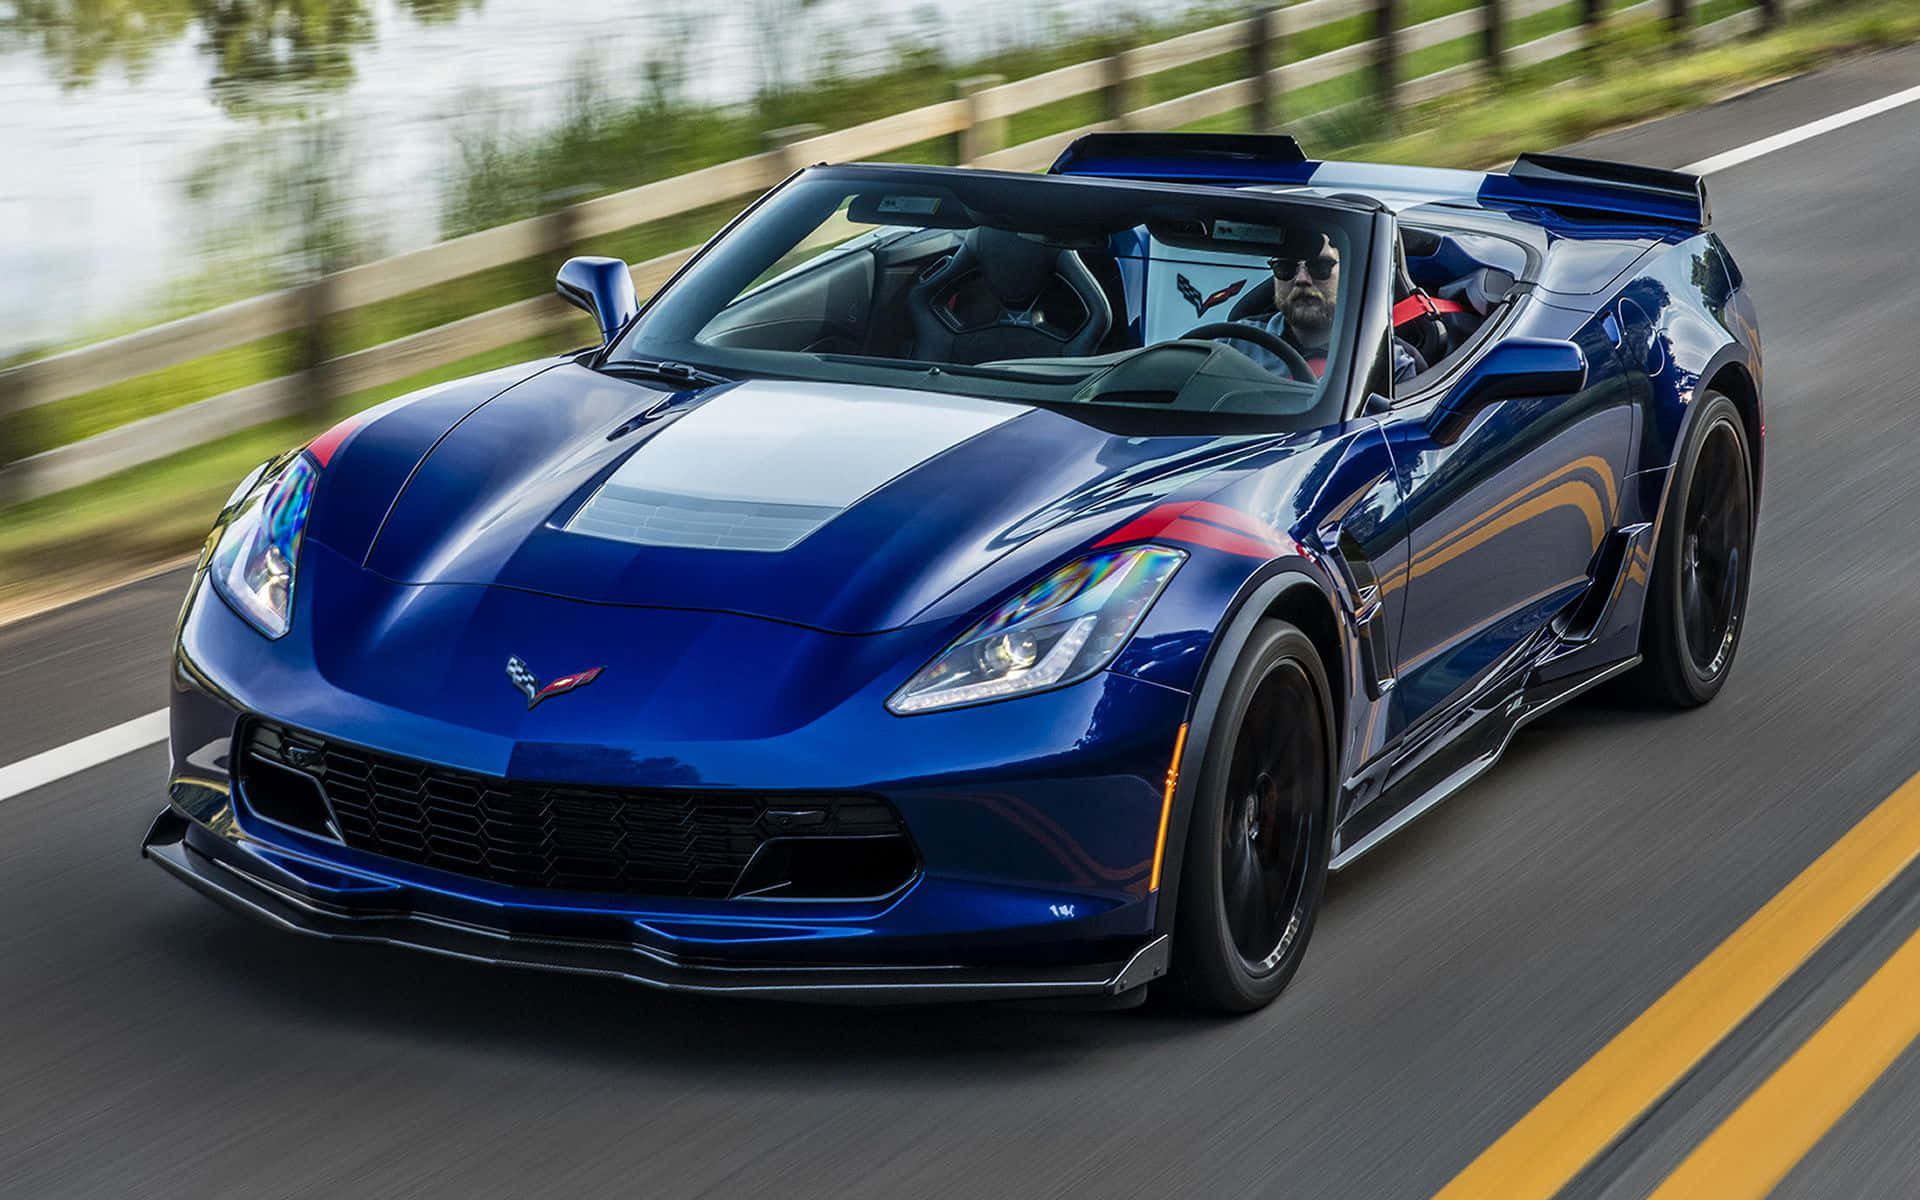 An Iconic American Automobile: The All Legendary Chevrolet Corvette"